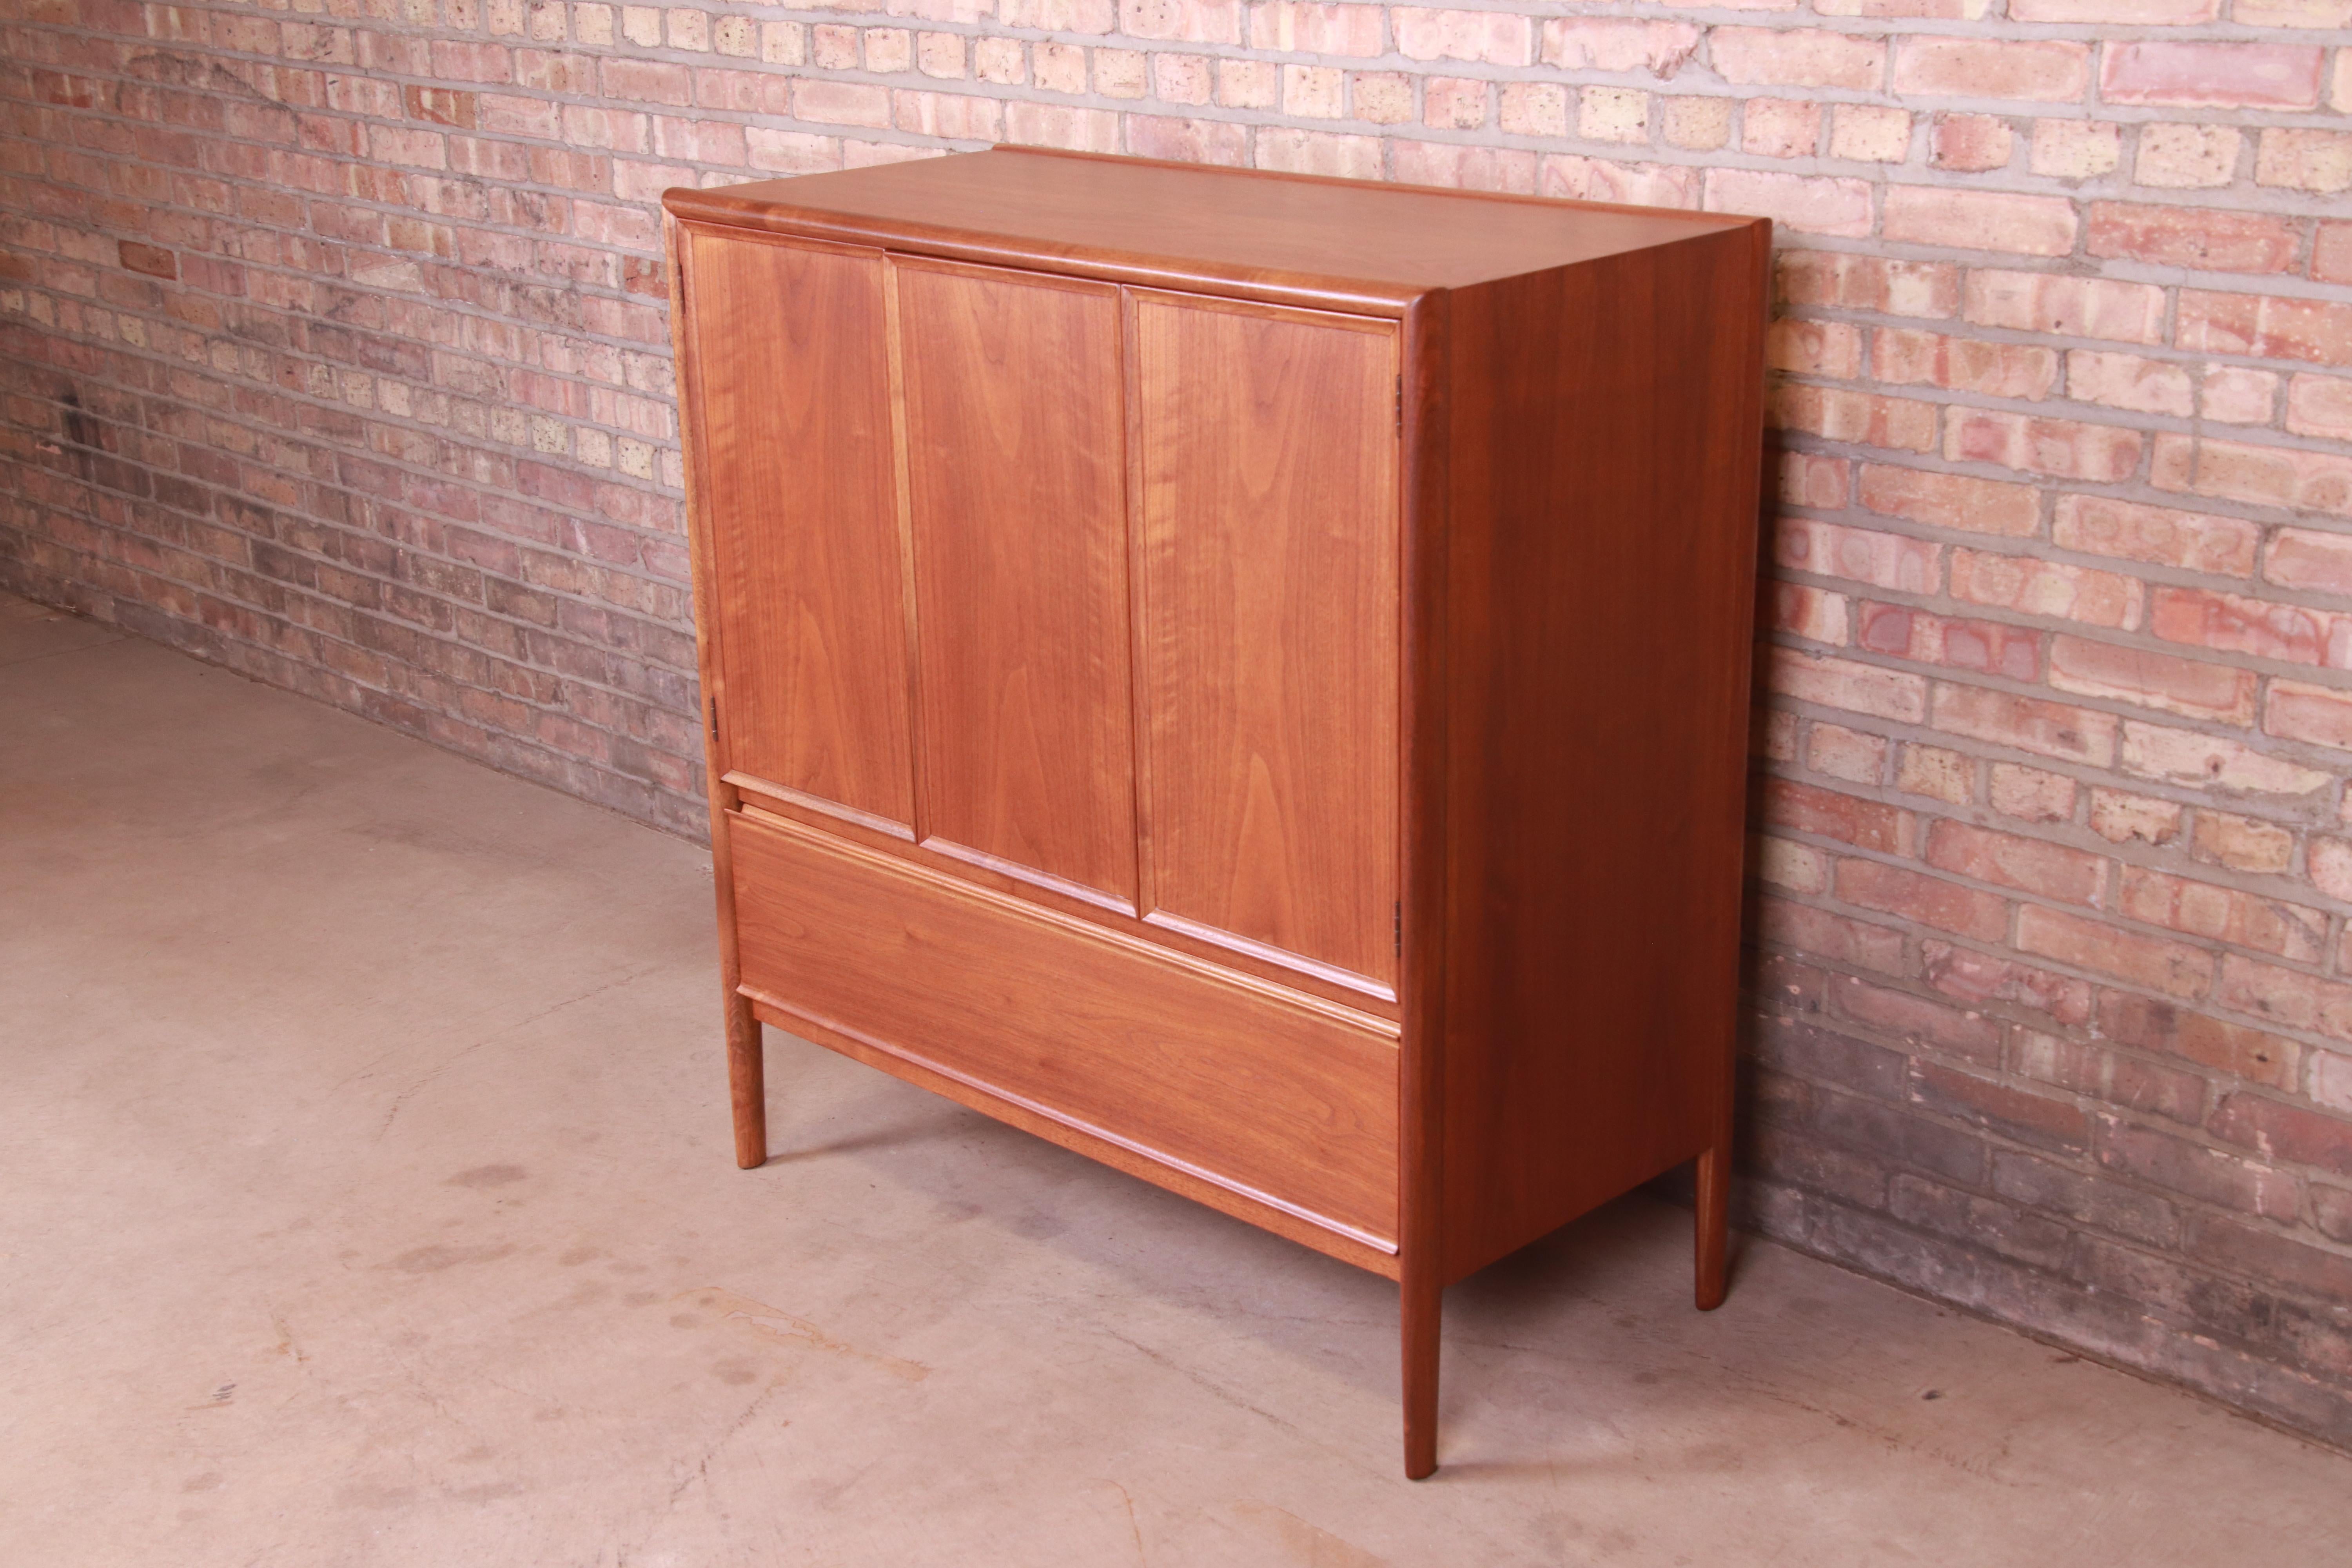 An exceptional Mid-Century Modern walnut highboy dresser or gentleman's chest with unique flip-up vanity mirror

By Barney Flagg for Drexel Furniture 